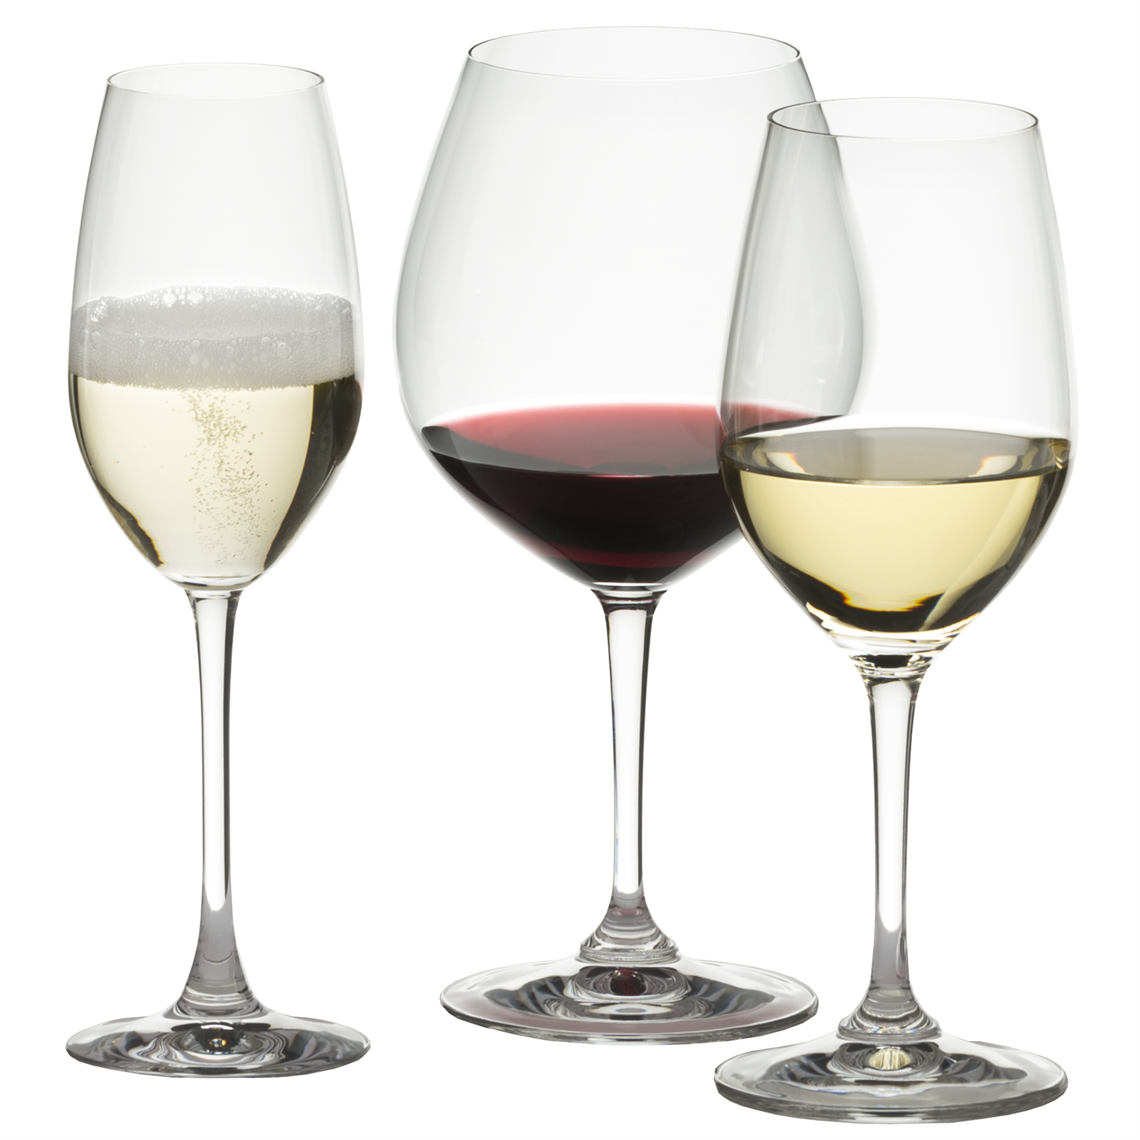 View more which riedel wine glass to choose from our Restaurant & Trade Glasses range